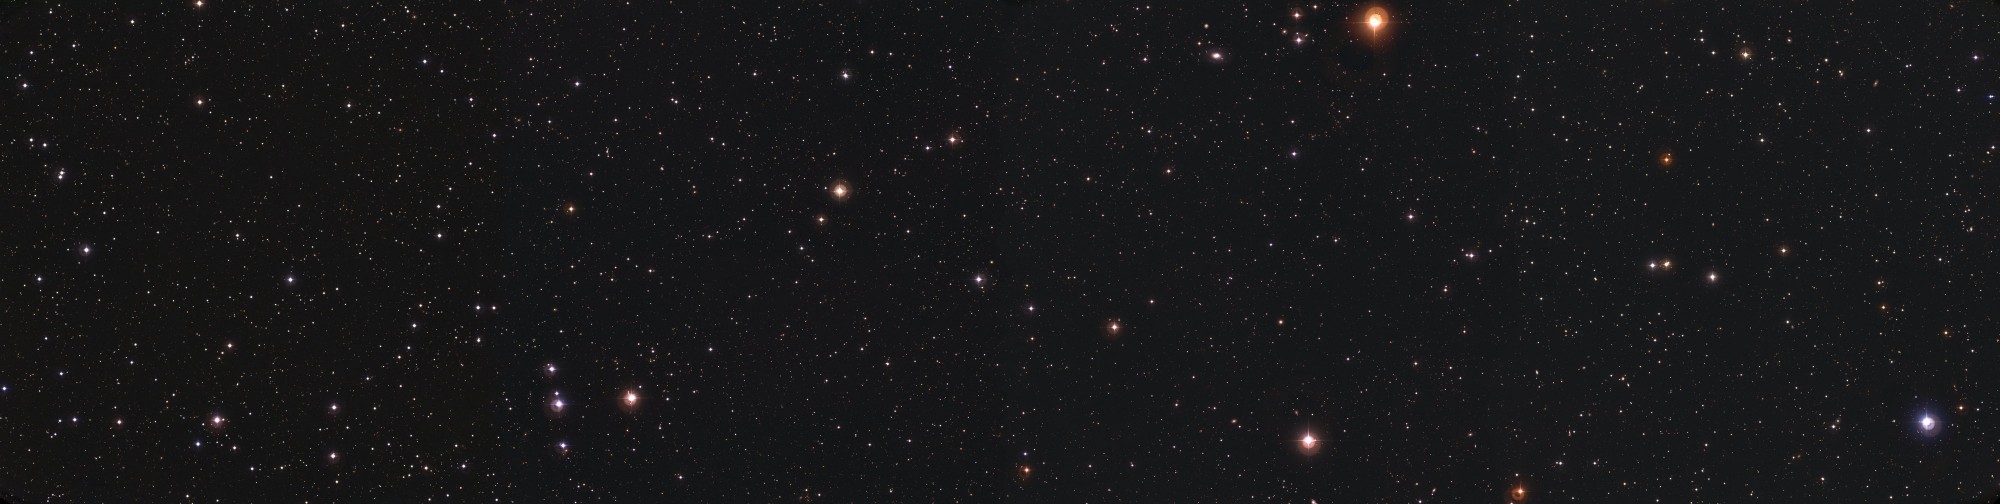 ESO- The Deep 3 'Empty' Field-Phot-14a-06